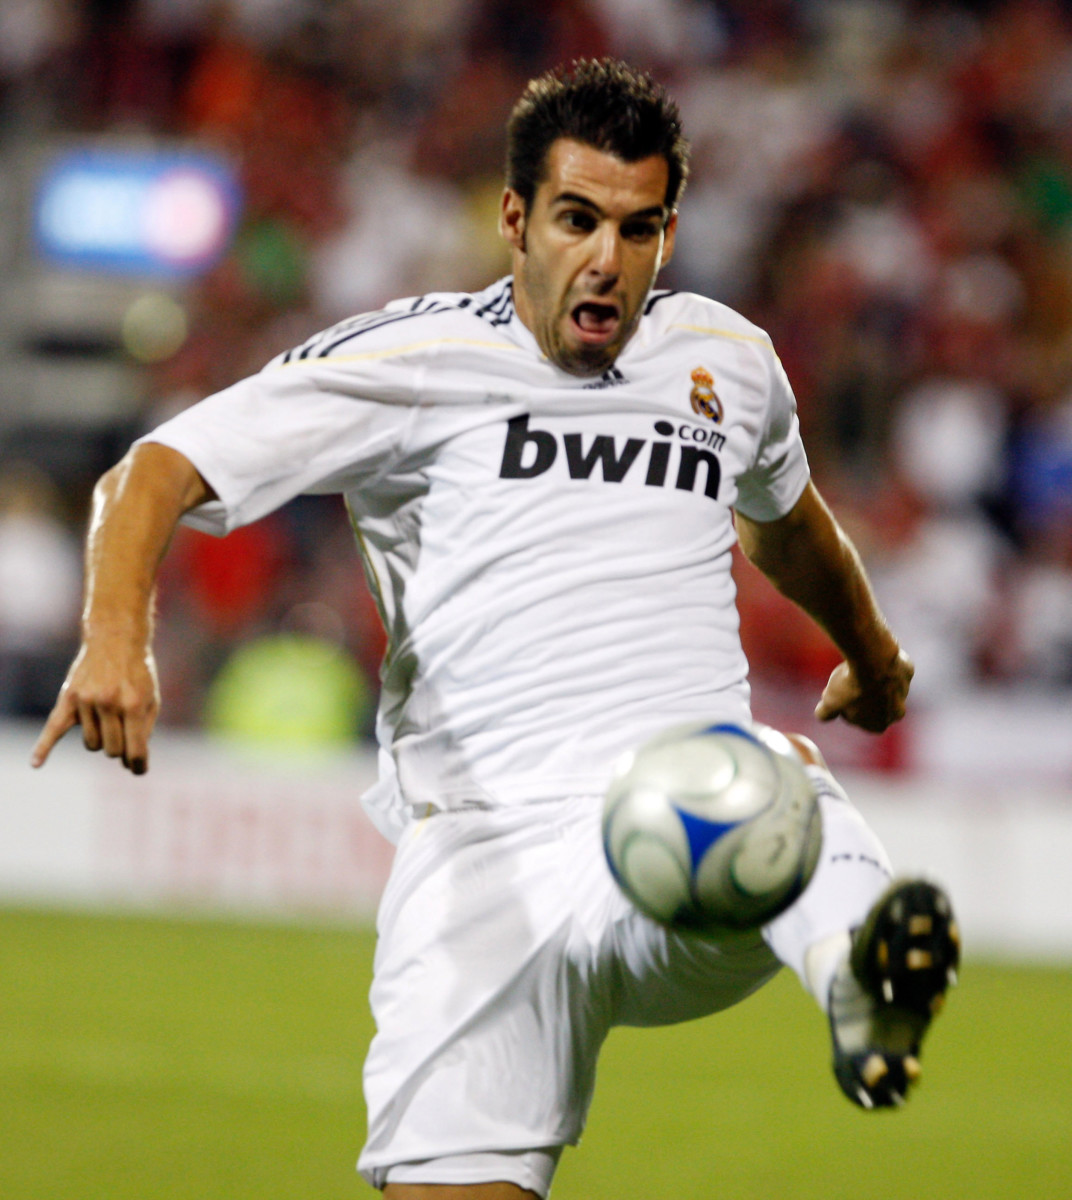 Before Alvaro Negredo signed for Man City, he was a Real Madrid youngster